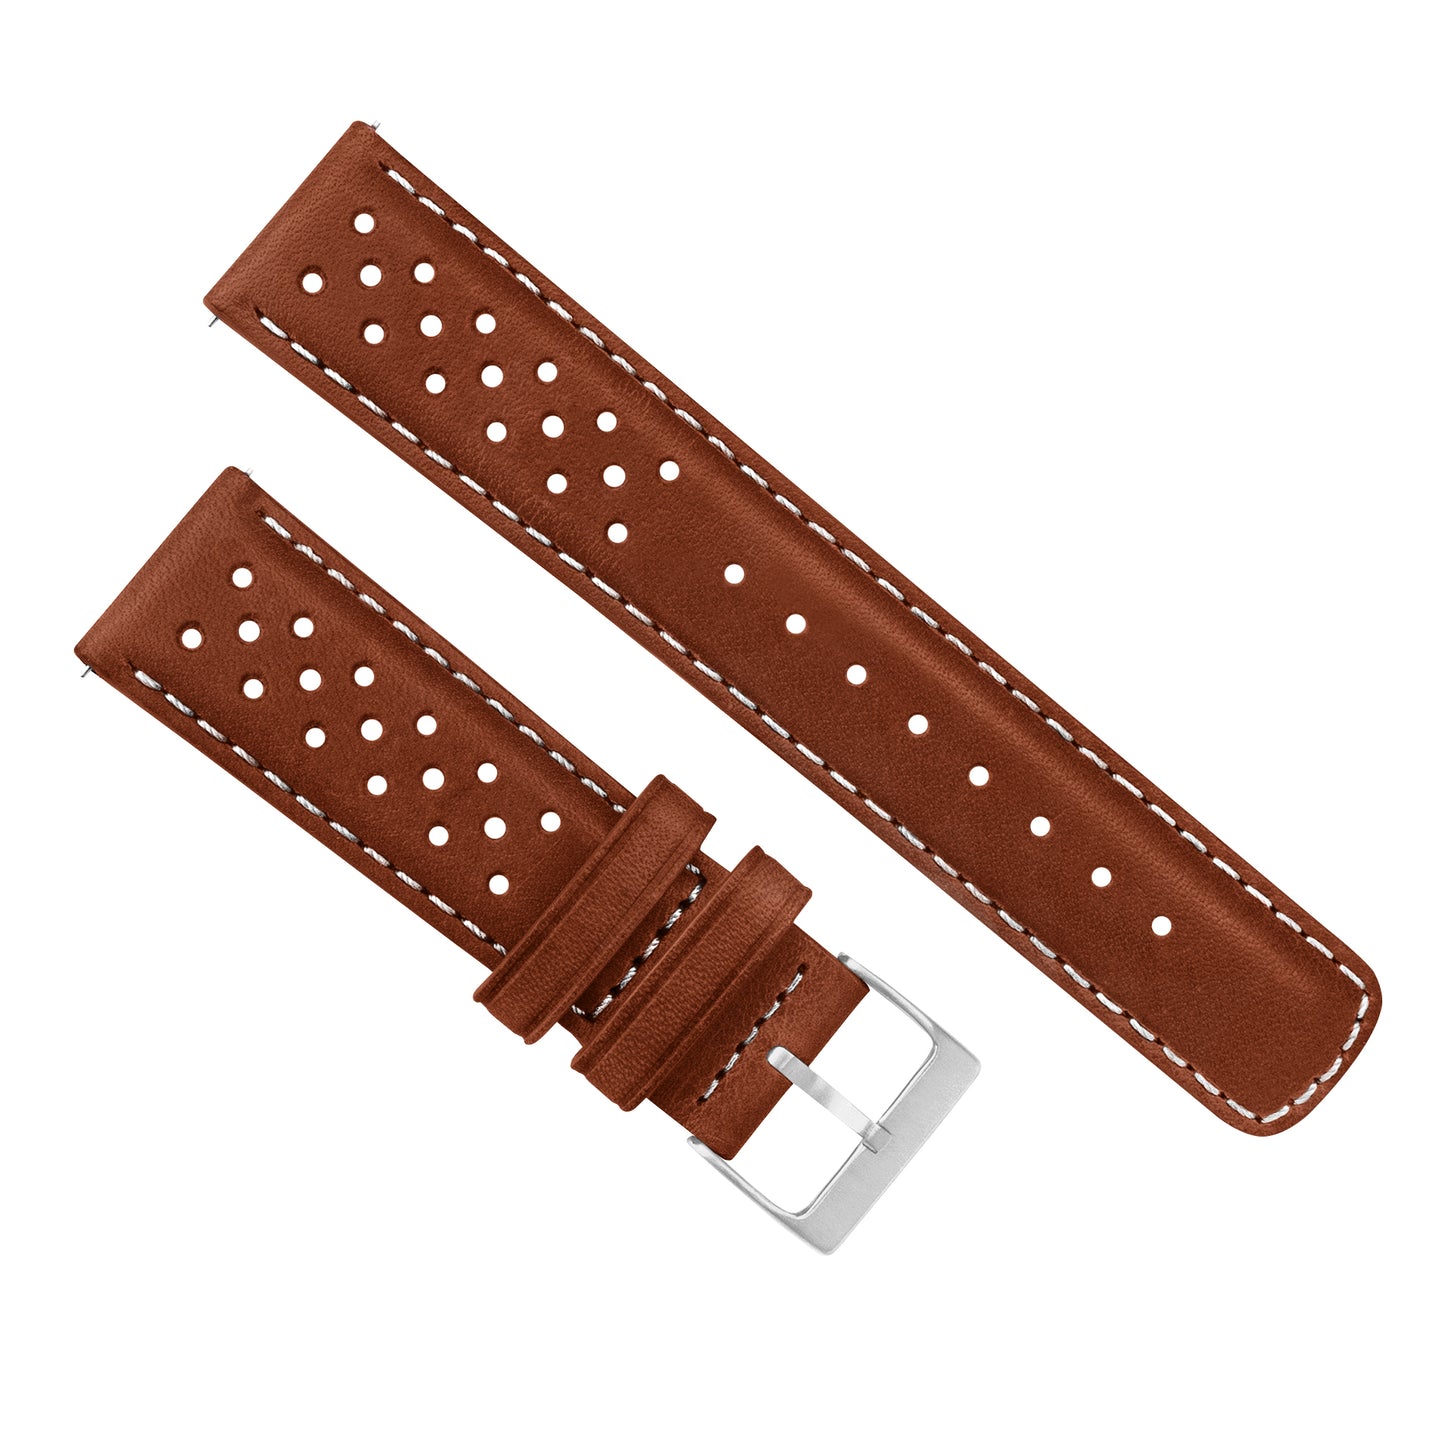 Fossil Gen 5 Racing Horween Leather Chocolate Brown Linen Stitch Watch Band